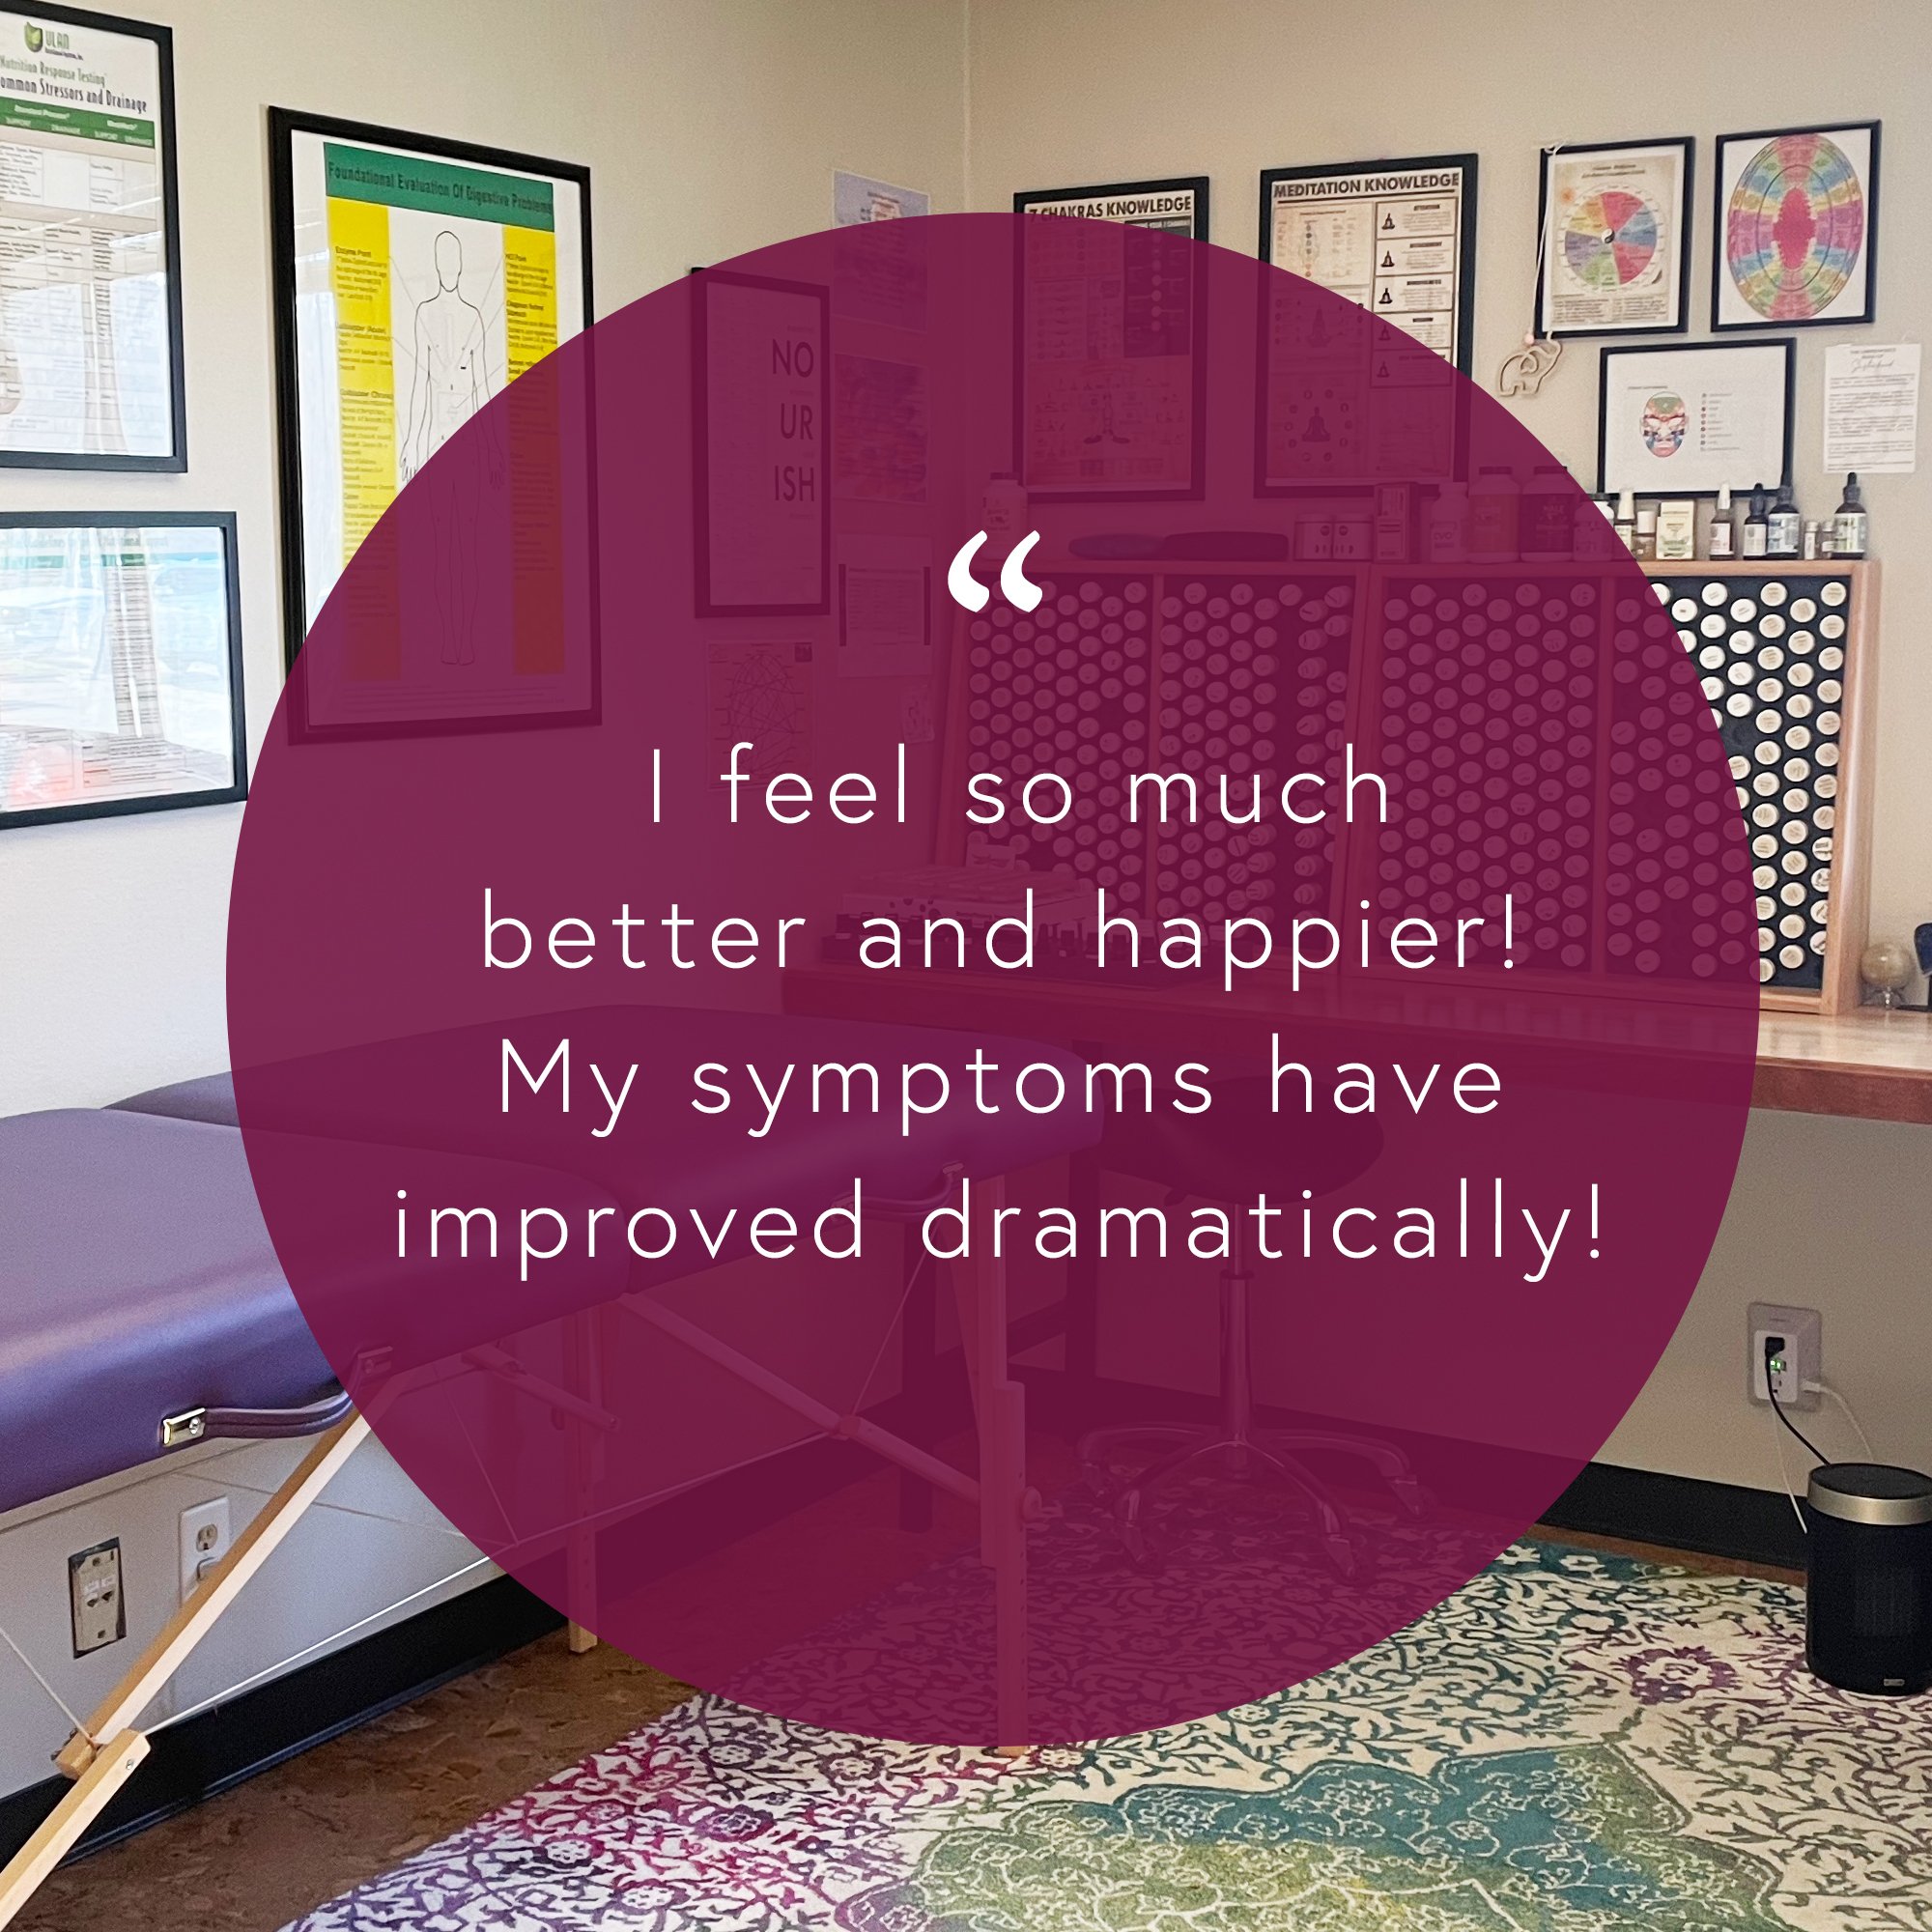 &quot;The women at Innate have helped me so much! I came into the office with a lot of health concerns&mdash;anxiety, heart palpitations, menopause, stomach problems, aches, and sleeplessness. I feel so much better and happier! My symptoms have impro